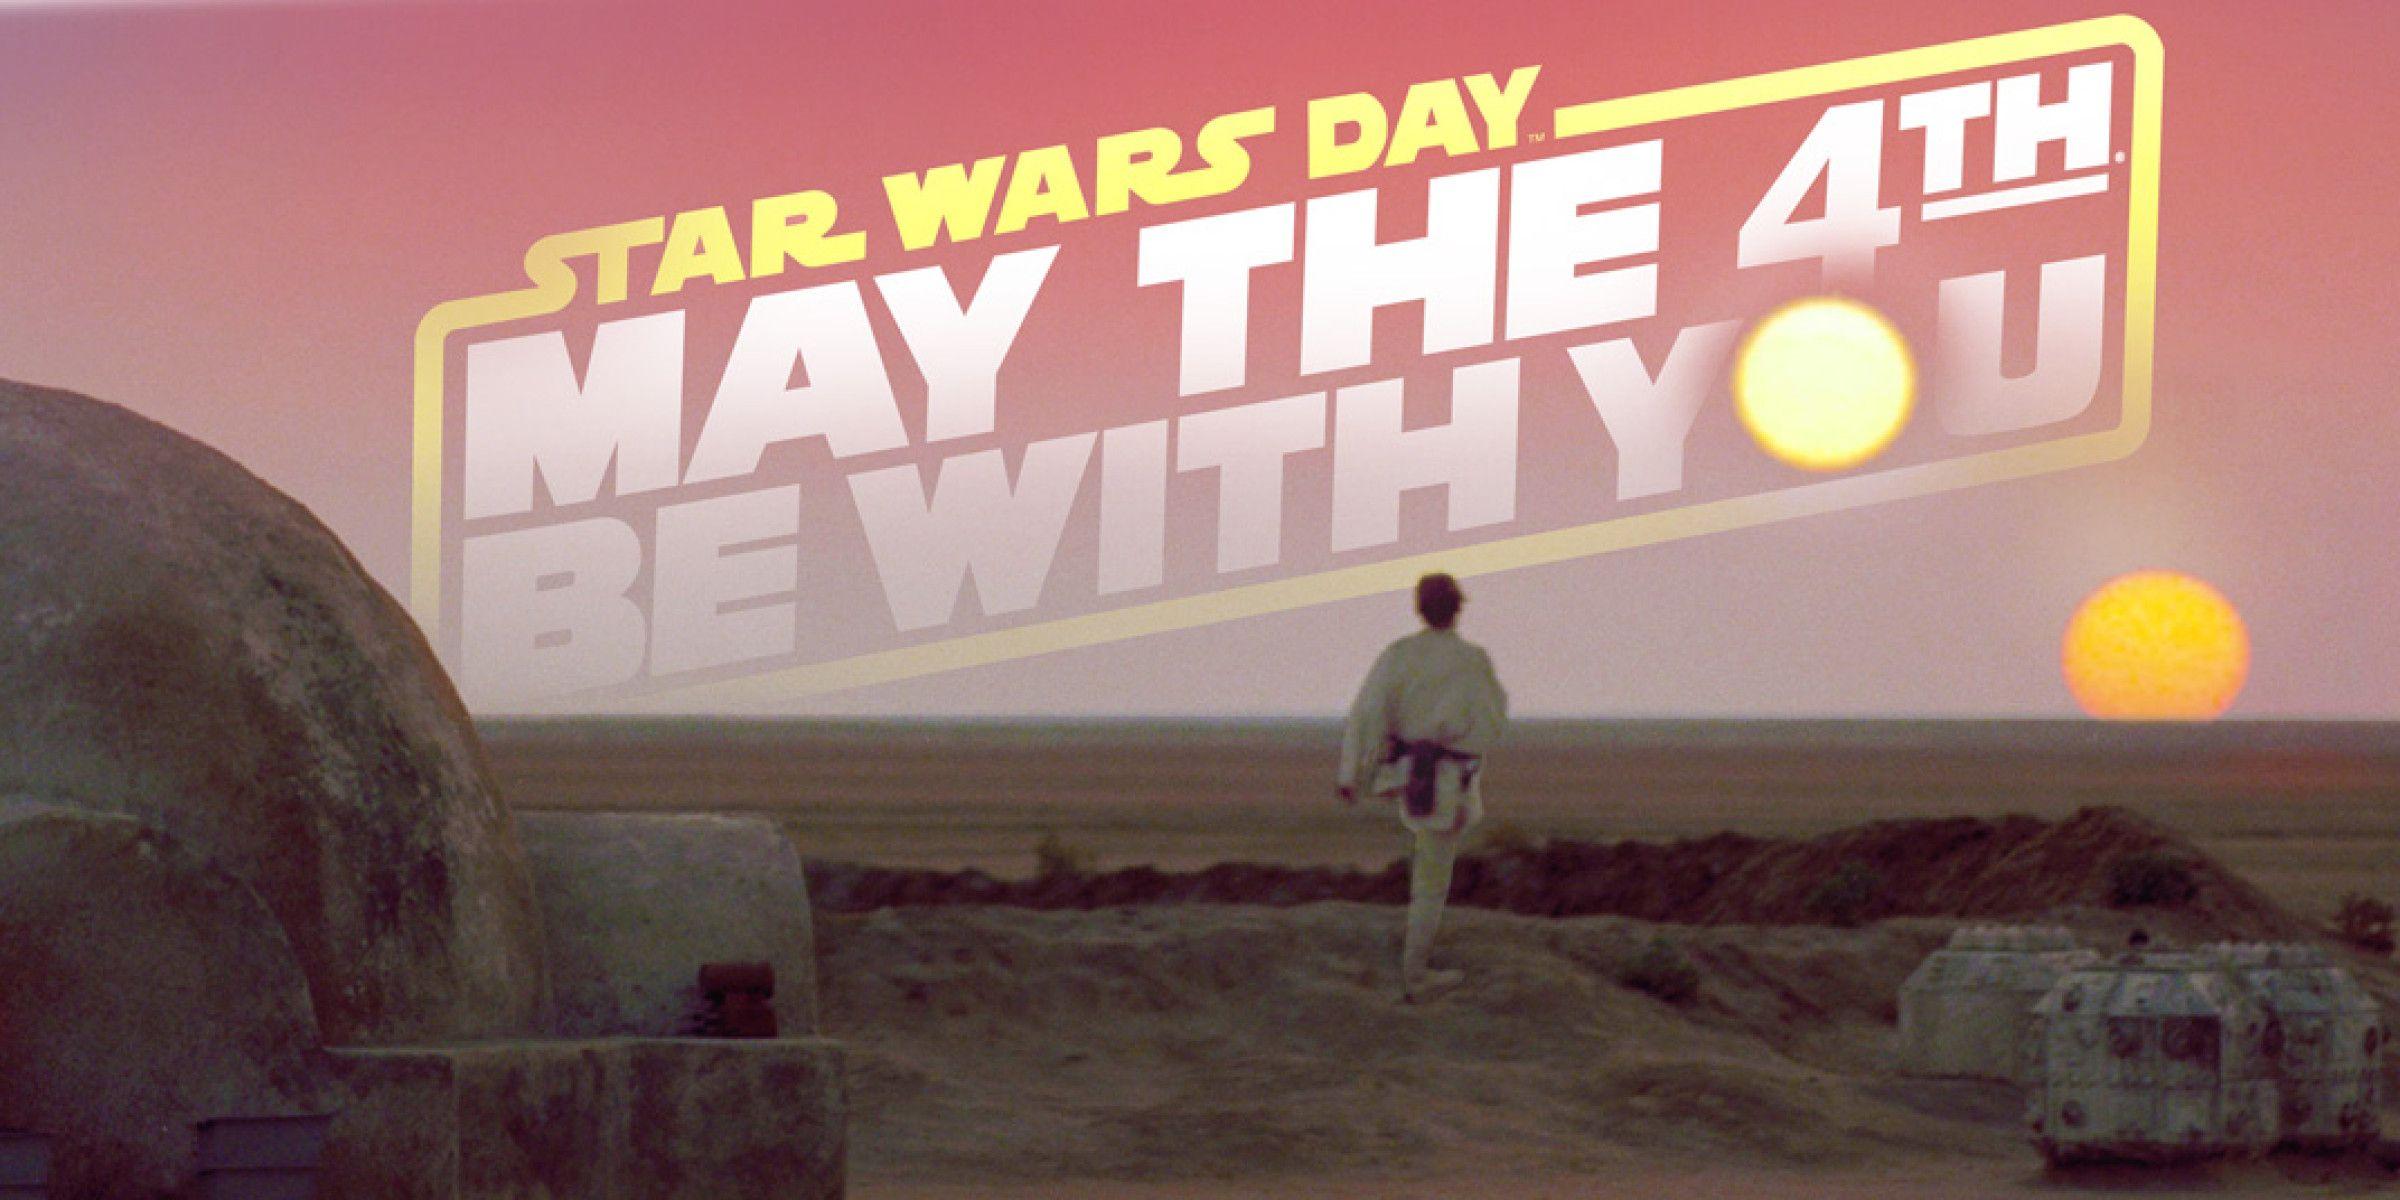 May The 4th Be With You”: A Plethora Of Posters By The Poster Posse